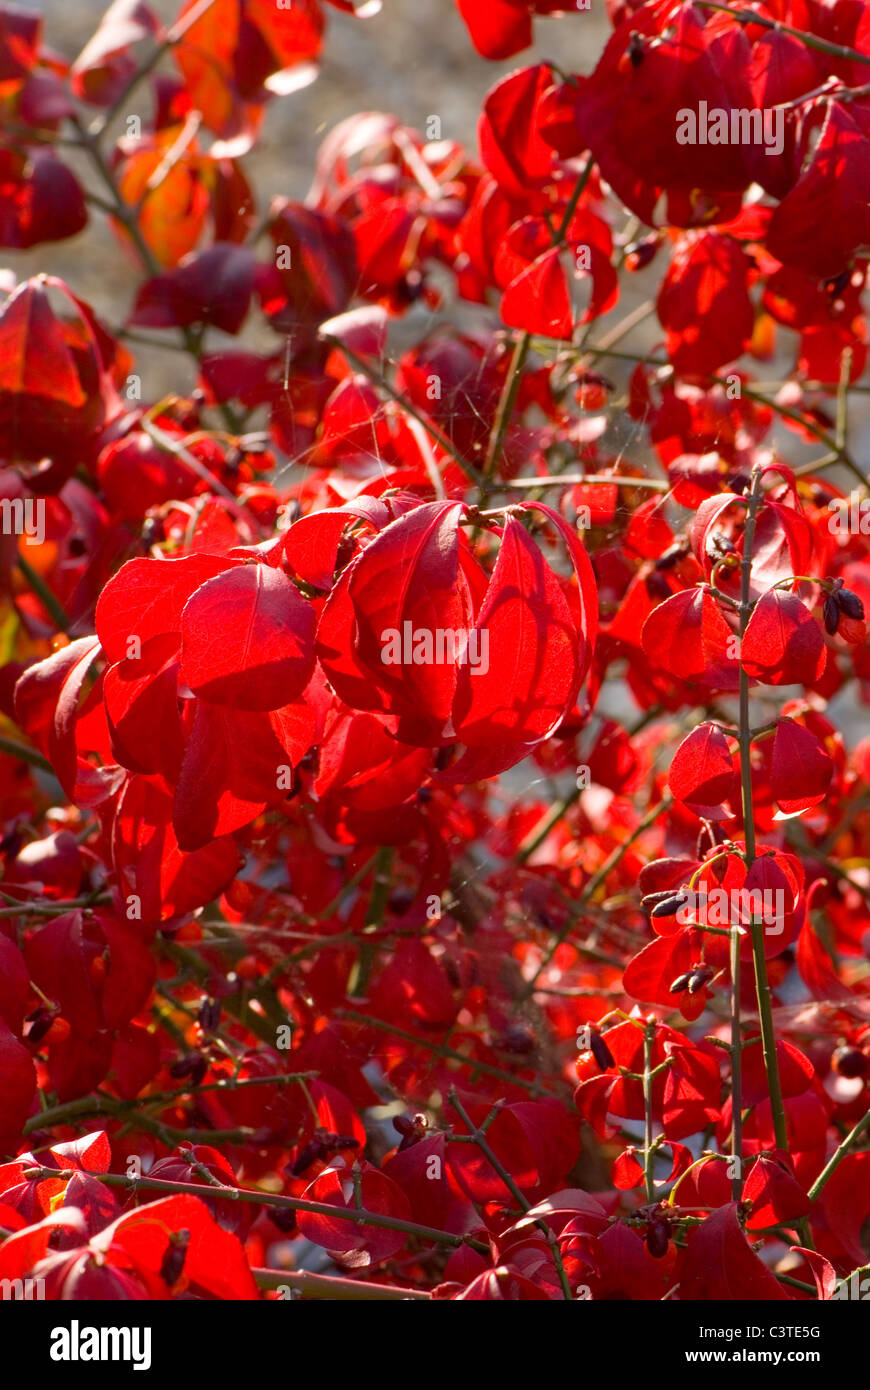 Red autumn leaves of the spindle tree, Euonymus alatus Stock Photo